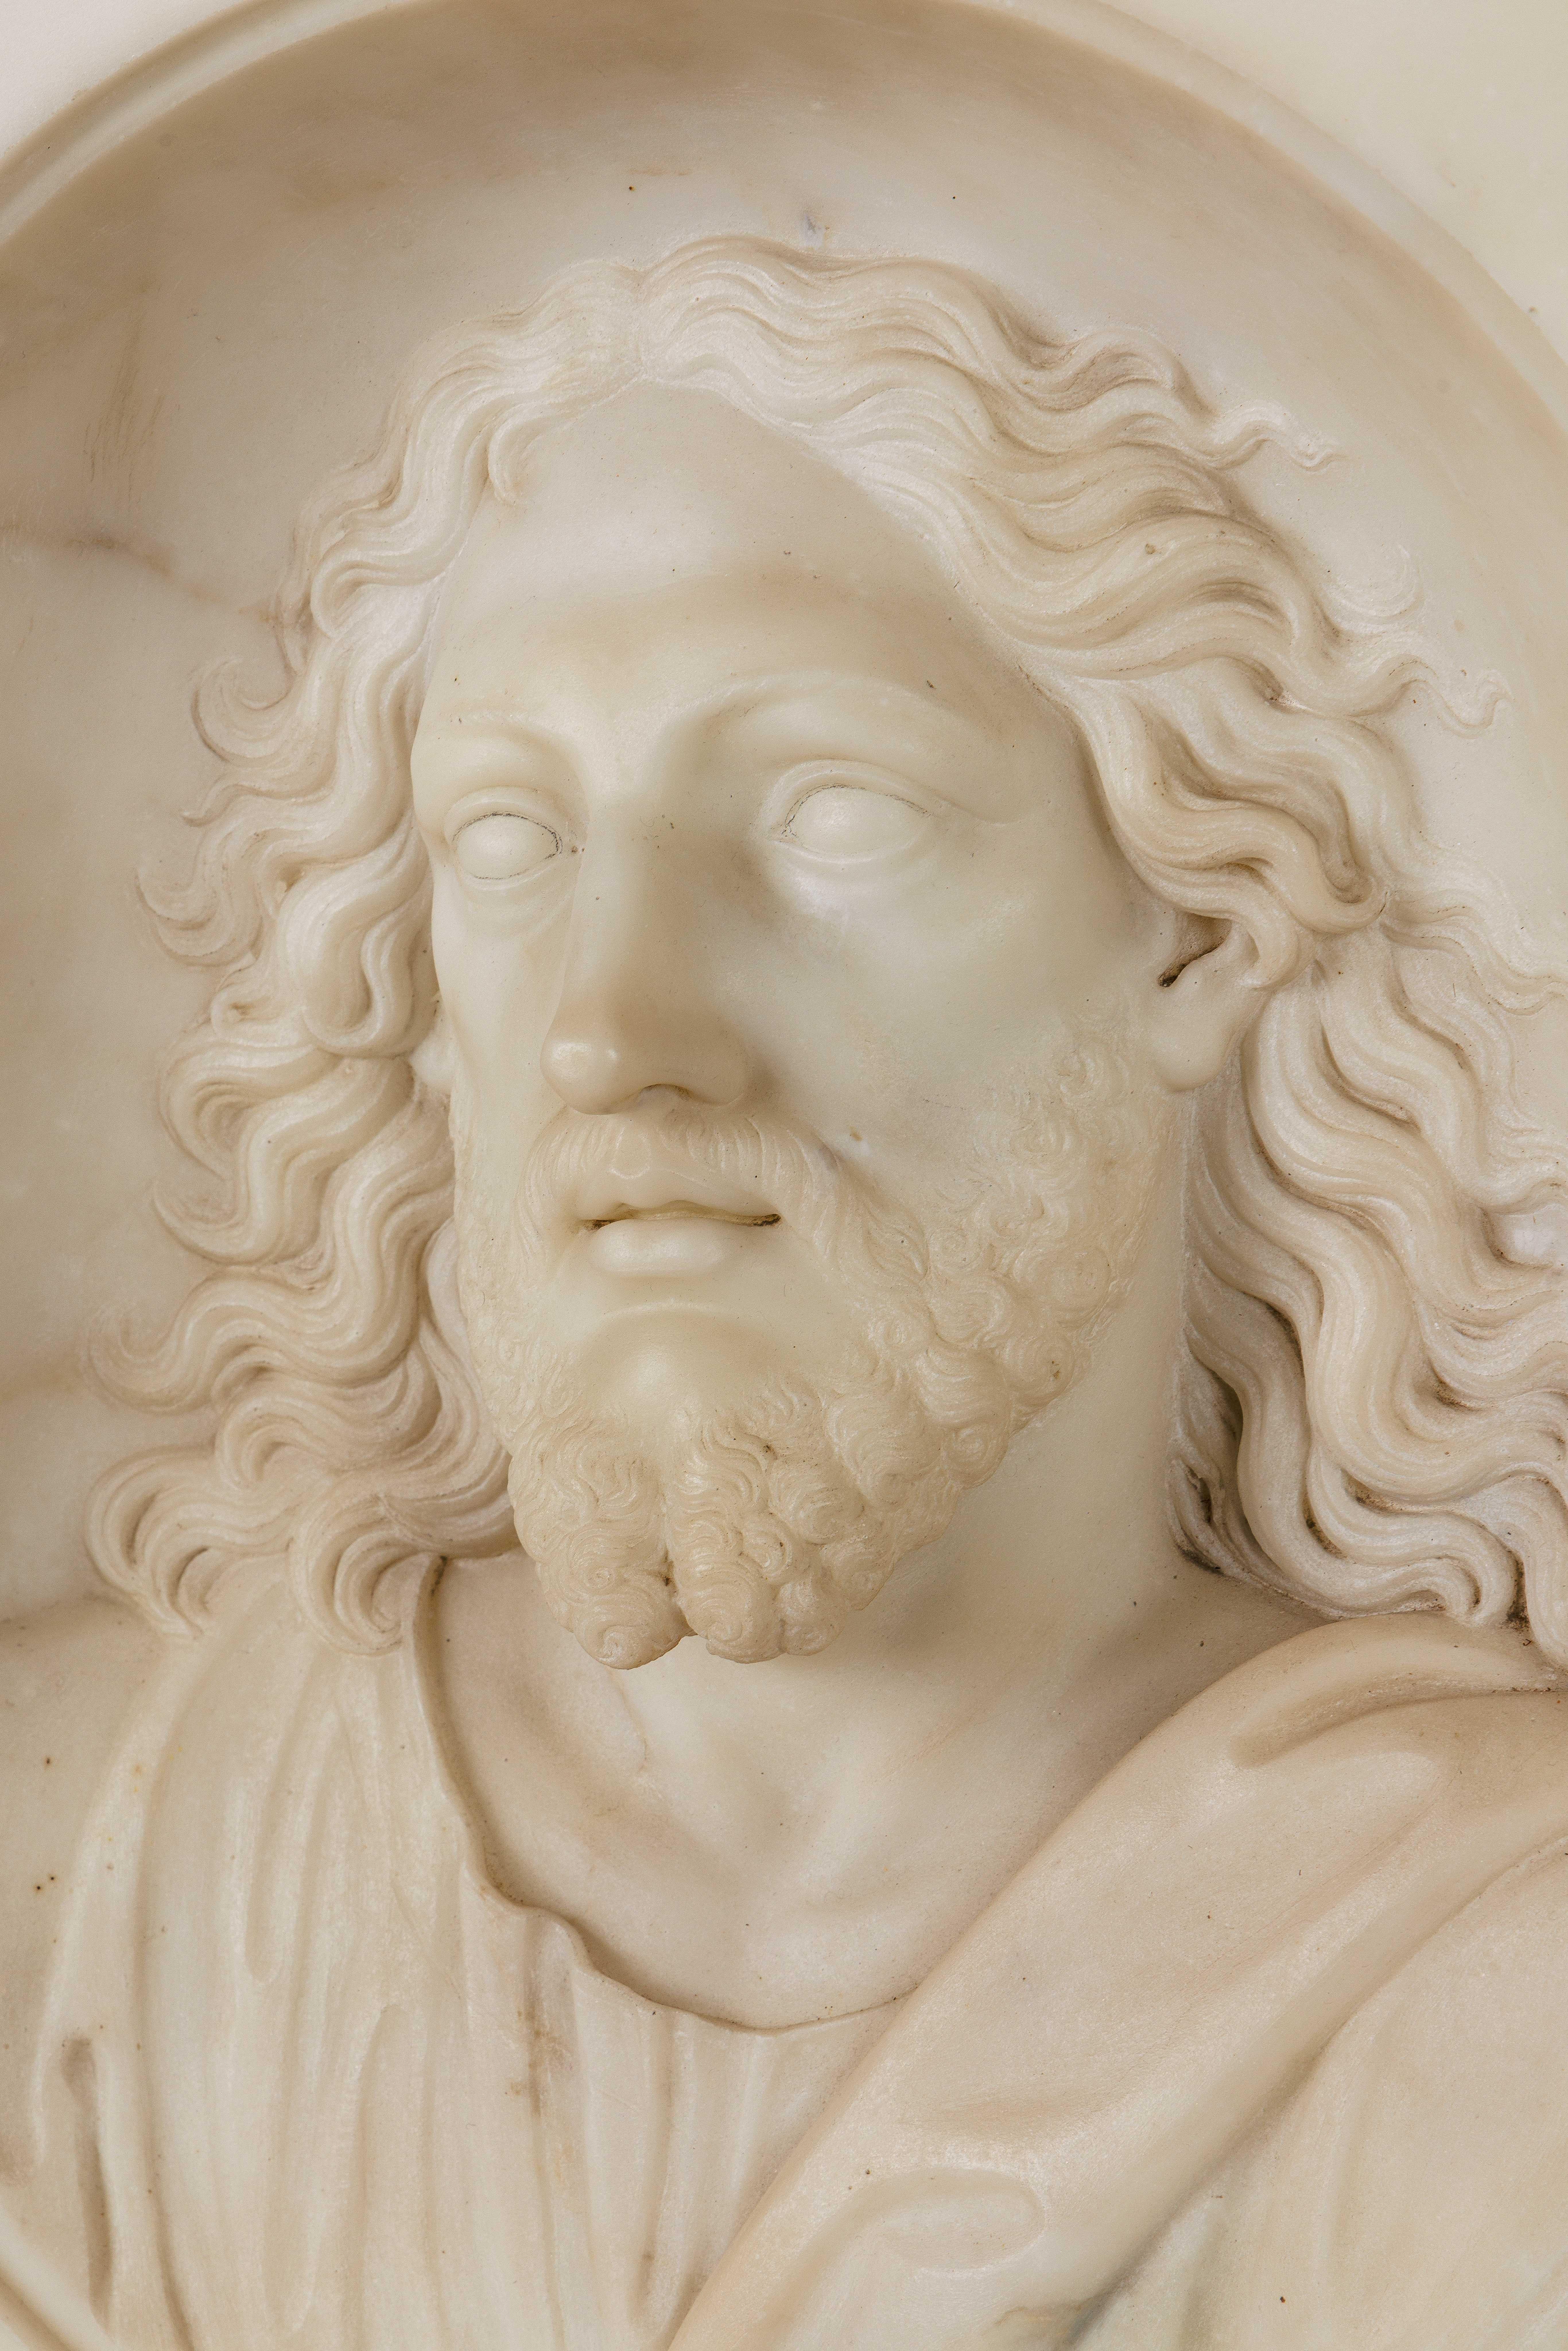 Renaissance Rare and Important Italian White Marble Bust Sculpture of Jesus Christ, C. 1850 For Sale